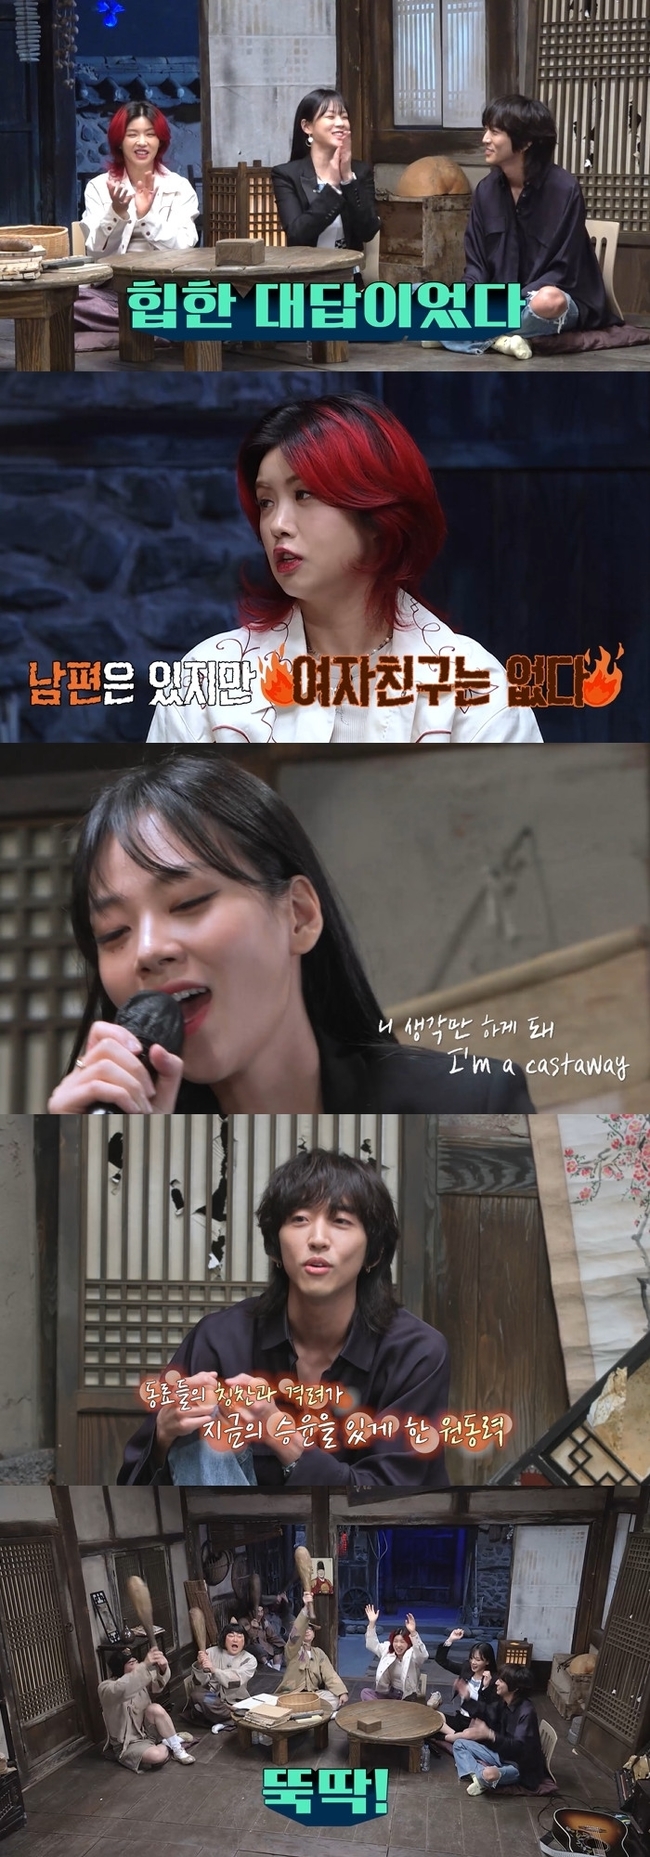 iKey, BB and Lee Seung-Yoon have revealed more hot success stories than ever.In the original Watcha entertainment, The Guardian: The Lonely and Great God, released on July 12, three hiptists, leading the way rather than following the trend, showed off their candid and dignified charm.The three people who made a strong impression from the appearance proved the aspect of the world by admiring themselves with their personality.In particular, BB responded to the definition of hip without saying hip and embarrassed Guardian: The Lonely and Great Gods.First, while iKey, a dancer recognized in the world, admitted that he was a guilty person who caused unexpected excitement, Yong-jin Yong-jin, a Yong-keebi, also confessed that he had been enthusiastically loved by high school students fans and claimed to be a guilty person.Lee Seung-Yoon, who was listening to his anecdote, laughed at the fact that he was a criminal.BB, who recently became the center of the topic by wearing an unconventional under costume immediately after the Coachella performance, introduced the amazing behind-the-scenes story that was related to the costume.I was not aware of the underwear costume because I was so busy changing clothes, and I noticed that the bottom was pierced while I was wearing a microphone during the interview.Everyone gave a thumbs-up to BBs experience, which emerged as a leader in hot fashion, without worrying about the fact, and digesting clothes nicely.Lee Seung-Yoon, who appeared like a comet as a singer in Singer Gain 30 and won the championship, told the story of a hard-earned growth period when the soundtrack Revenue was only 172 won.He said he started composing while playing his brothers guitar in junior high school and started to enter music with the idea of ​​Is it a genius?BB also said, The two bottles creates The Artist.Lee Seung-Yoon, who sold out 3,000 concerts in the last five minutes after leaving the unknown period, said he had reported a comprehensive income tax for the first time.Before the majors were evaluated, there was a genuine experience of those who were hard and sad as they were active in the minor area.IKey confessed that he was a working mom who went to work, but he remembered the days when he was suffering because he did not have any income, and started playing Latin dance and even played as a player, but he had to give up because he had too much money.He also presented a sultry Latin dance that drew cheers from Guardian: The Lonely and Great Gods.Lee Seung-Yoon also felt the qualification as an unknown The Artist, and he was impressed by the fact that Lee Sun-hee, the presidential candidate, completely overcame it with his impressive memories of covering his song.On the other hand, BB conveyed the success story of Yoon Mi-rae and Tiger JK as music teachers as an accidental opportunity, expressing himself in the modifier X to be and shining a dignified charm.